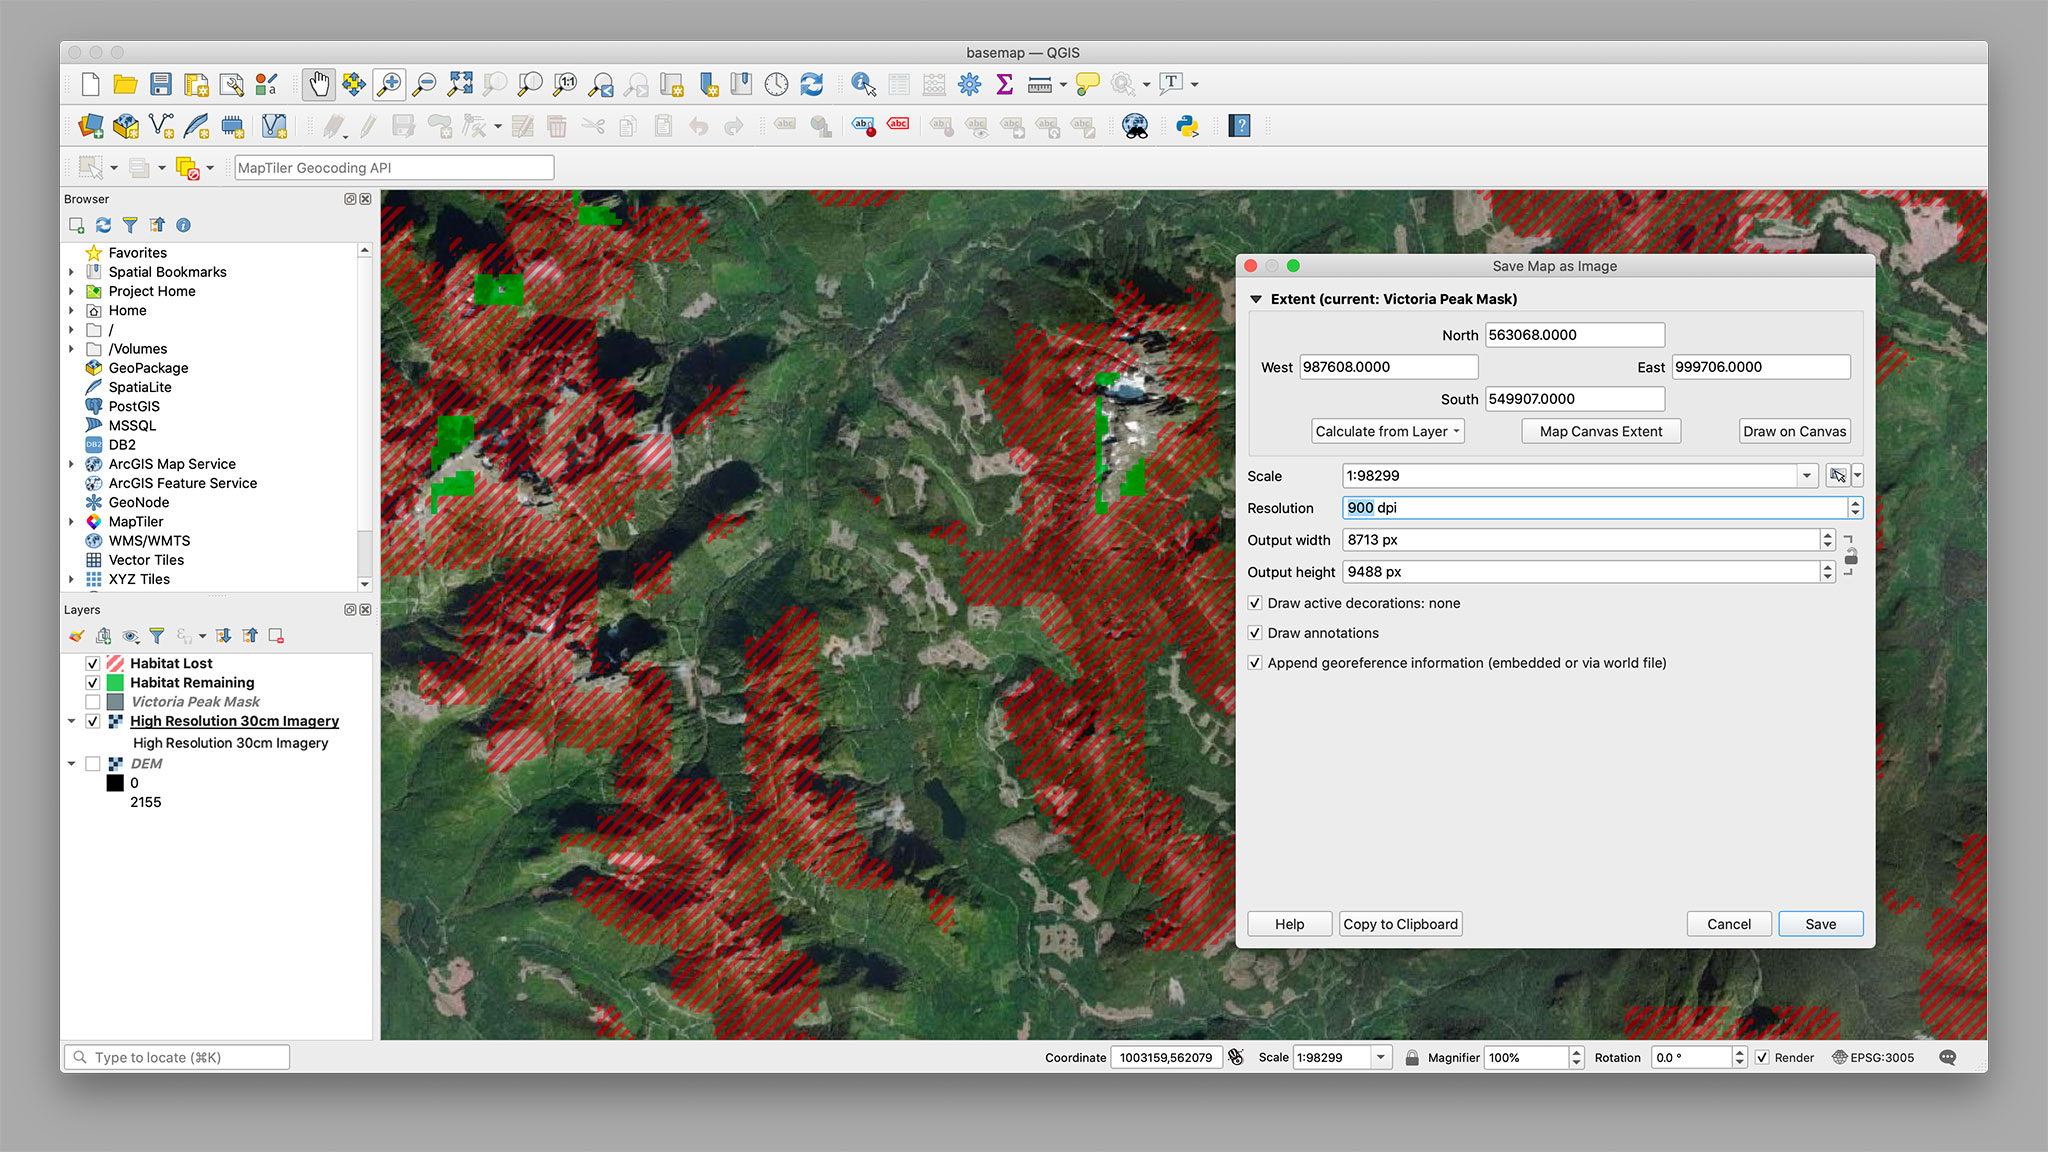 Exporting the map from QGIS